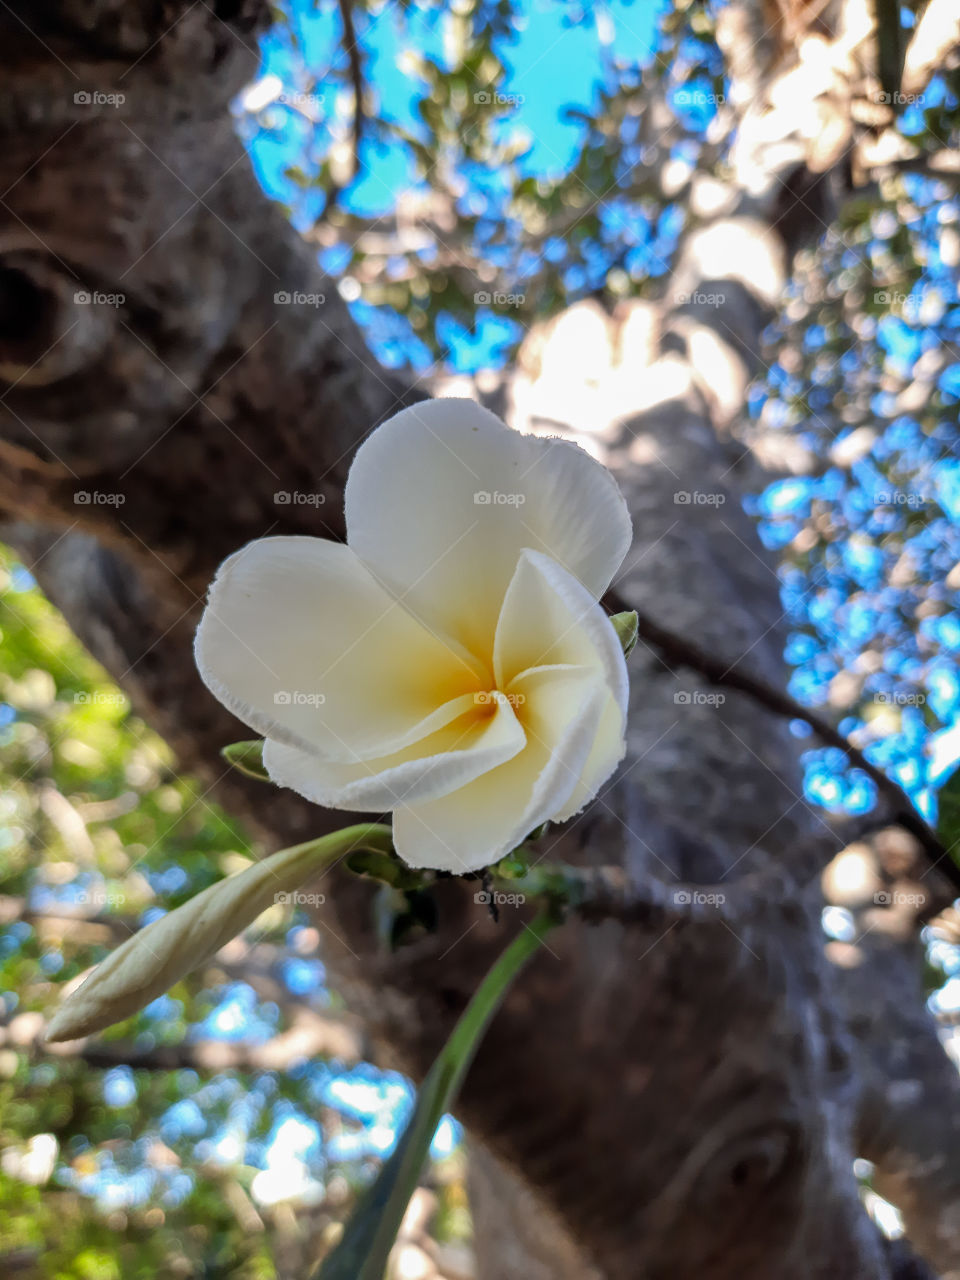 A beautiful temple tree flower in nice white and yellow in the yard. Cool and relaxing with vivid background. A portrait of a plant.